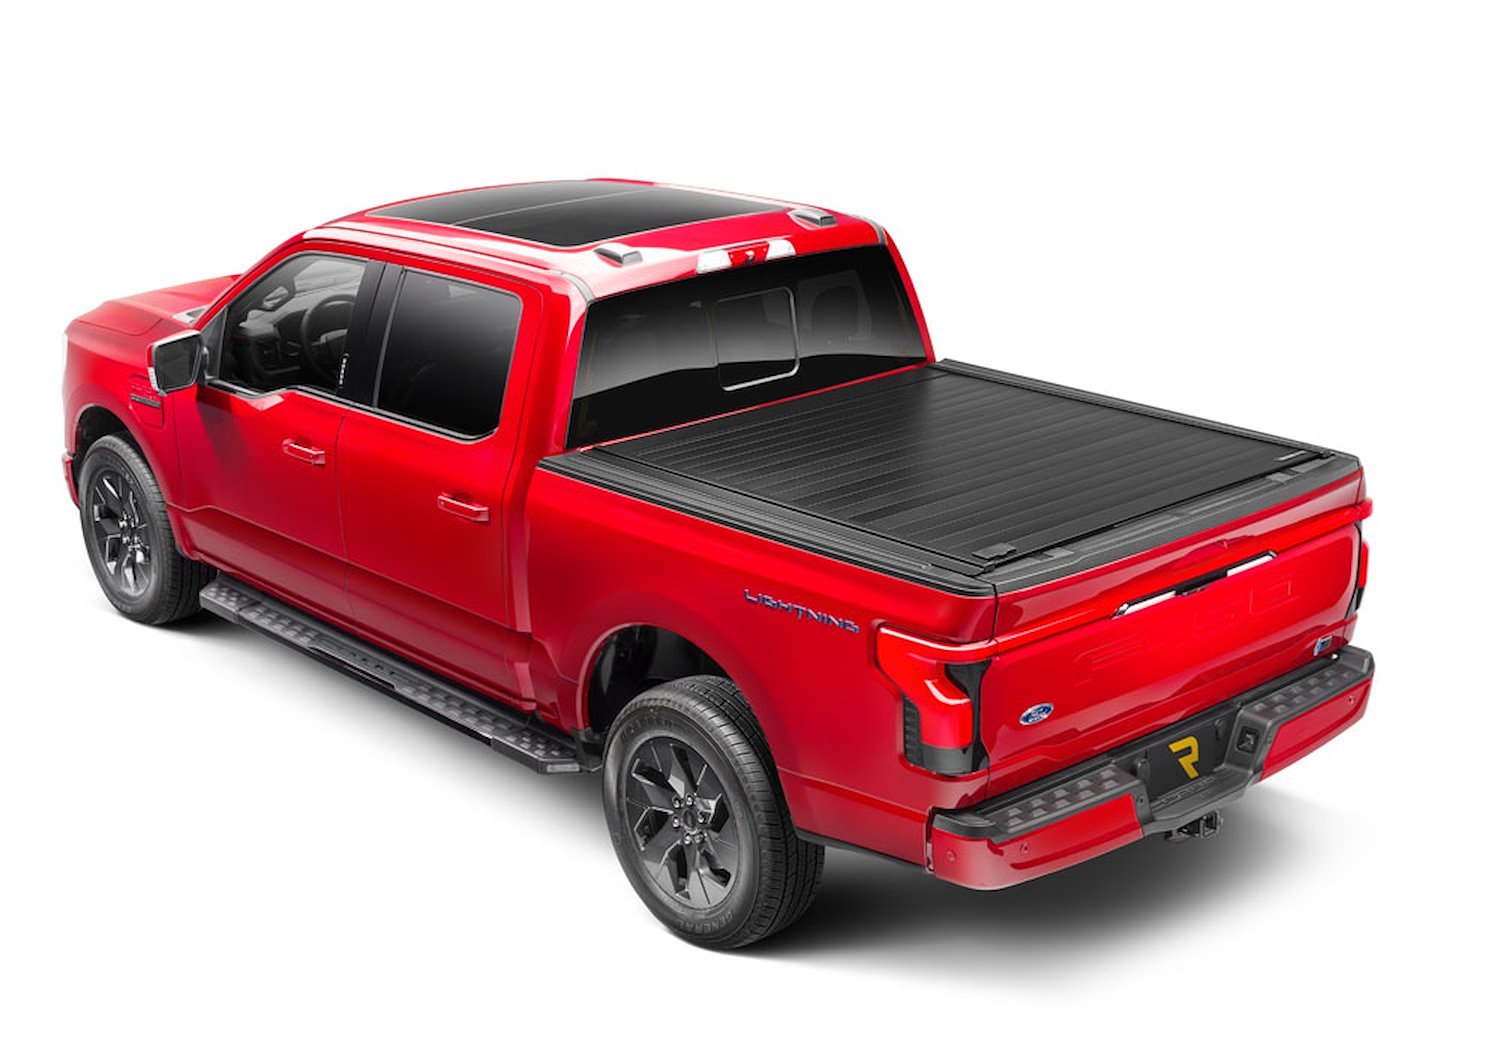 80378 RetraxPRO MX Retractable Tonneau Cover Fits Select Ford F-150 5' 7" Bed (Includes Lightning) without Stake Pockets